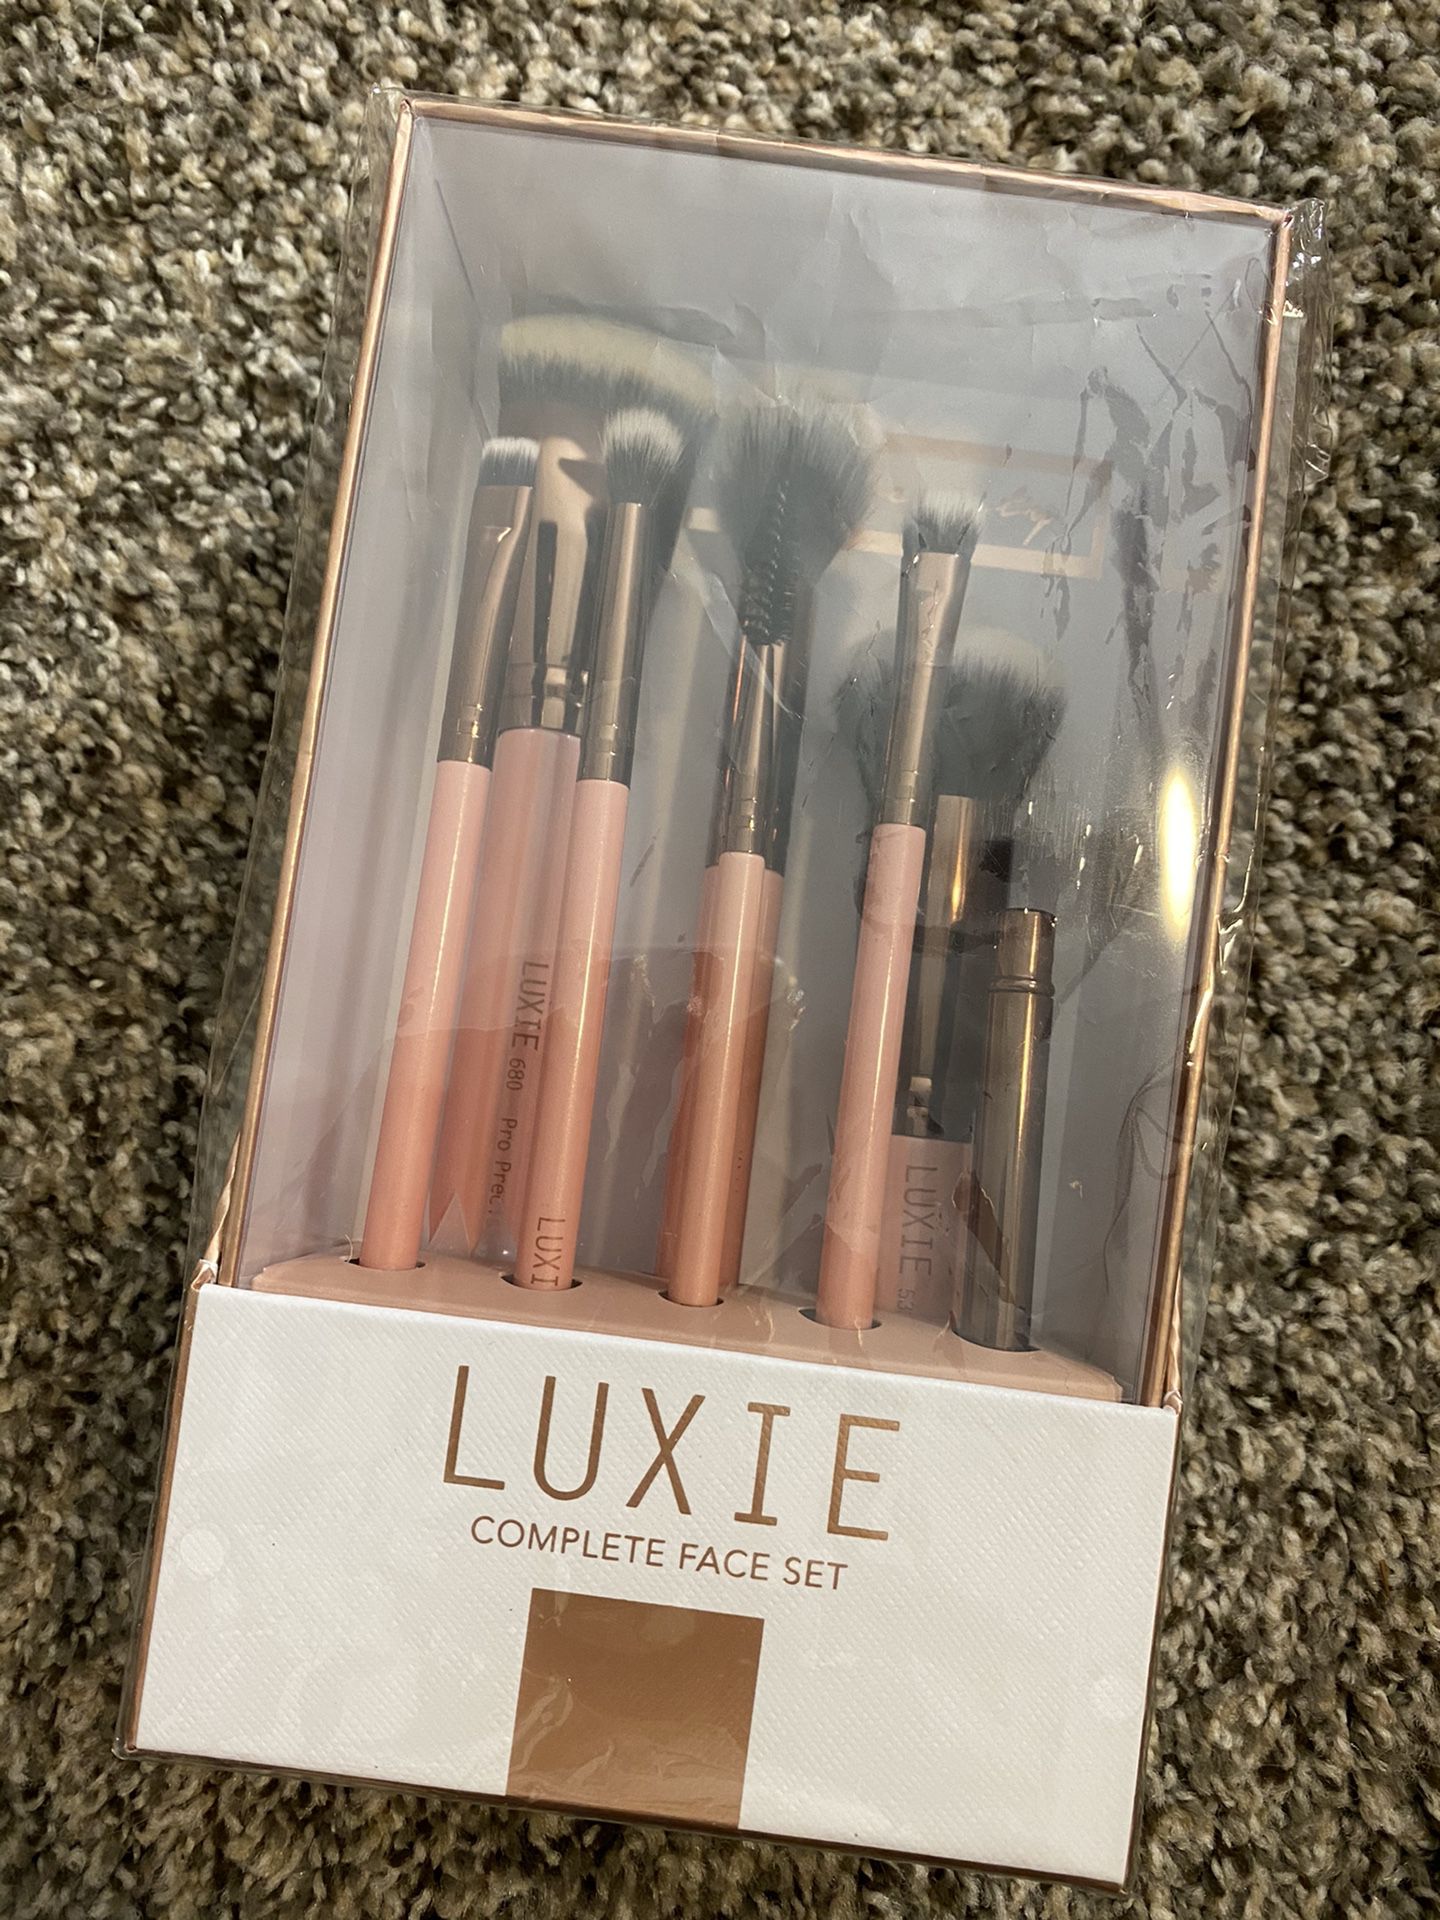 Luxie complete face brush set makeup brushes